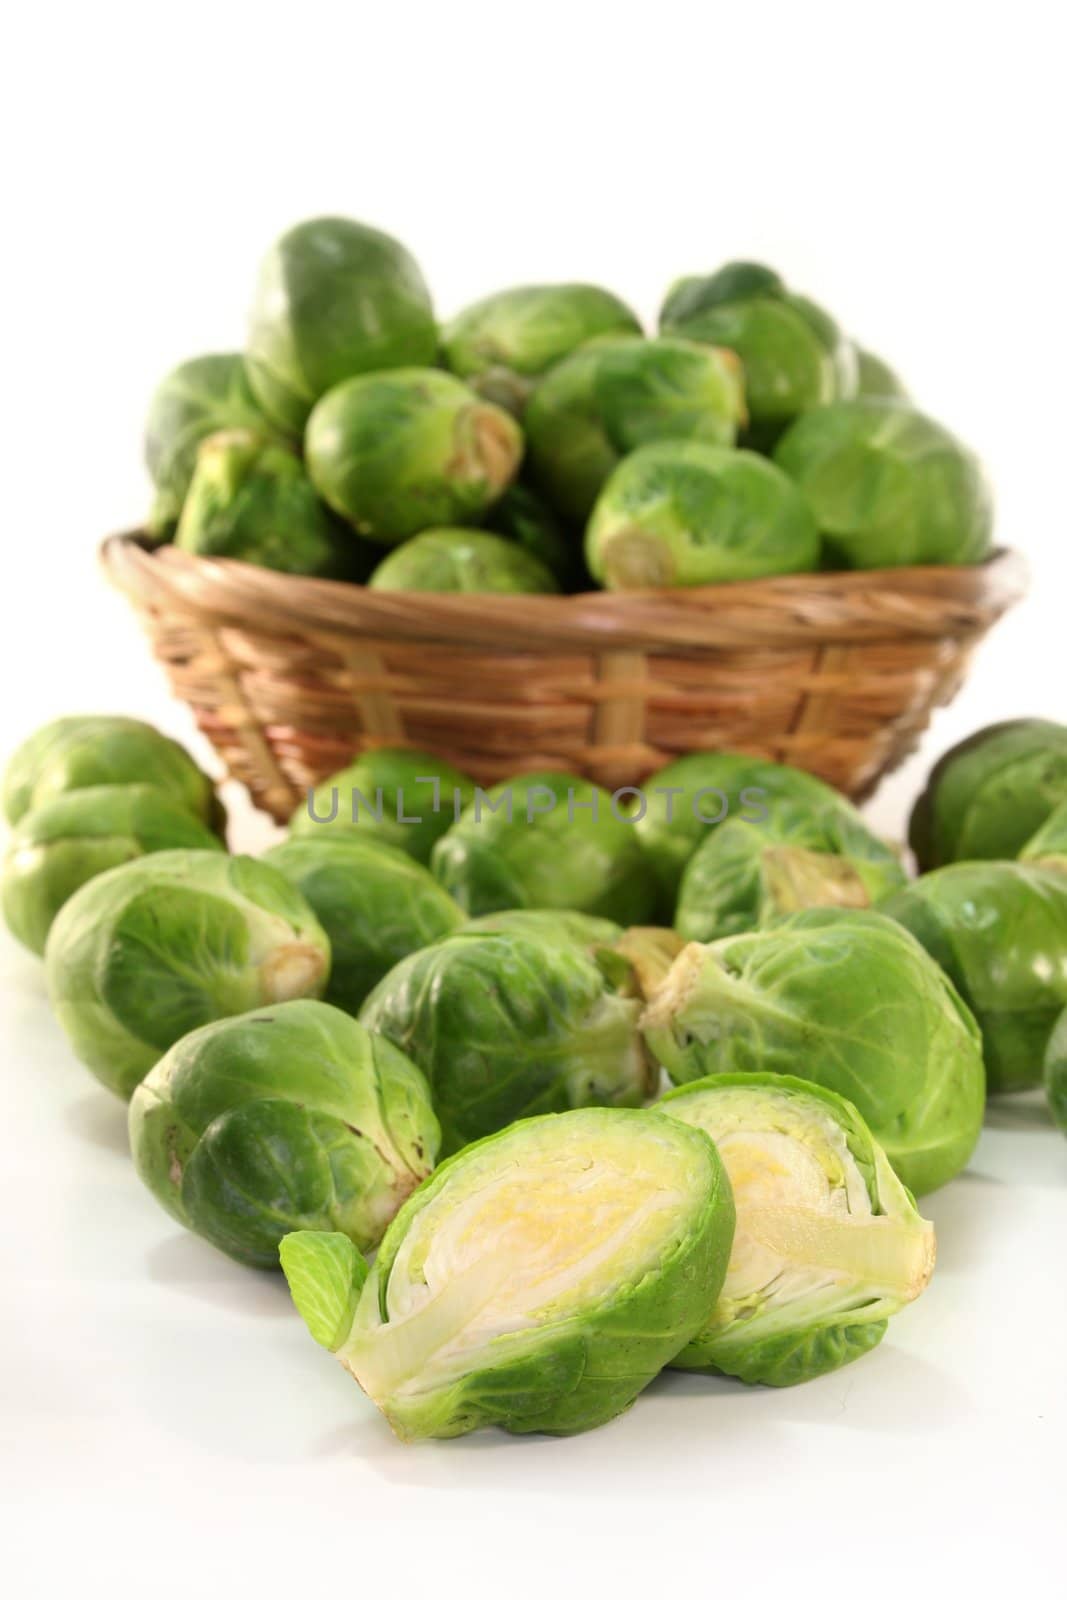 Brussels sprouts by silencefoto